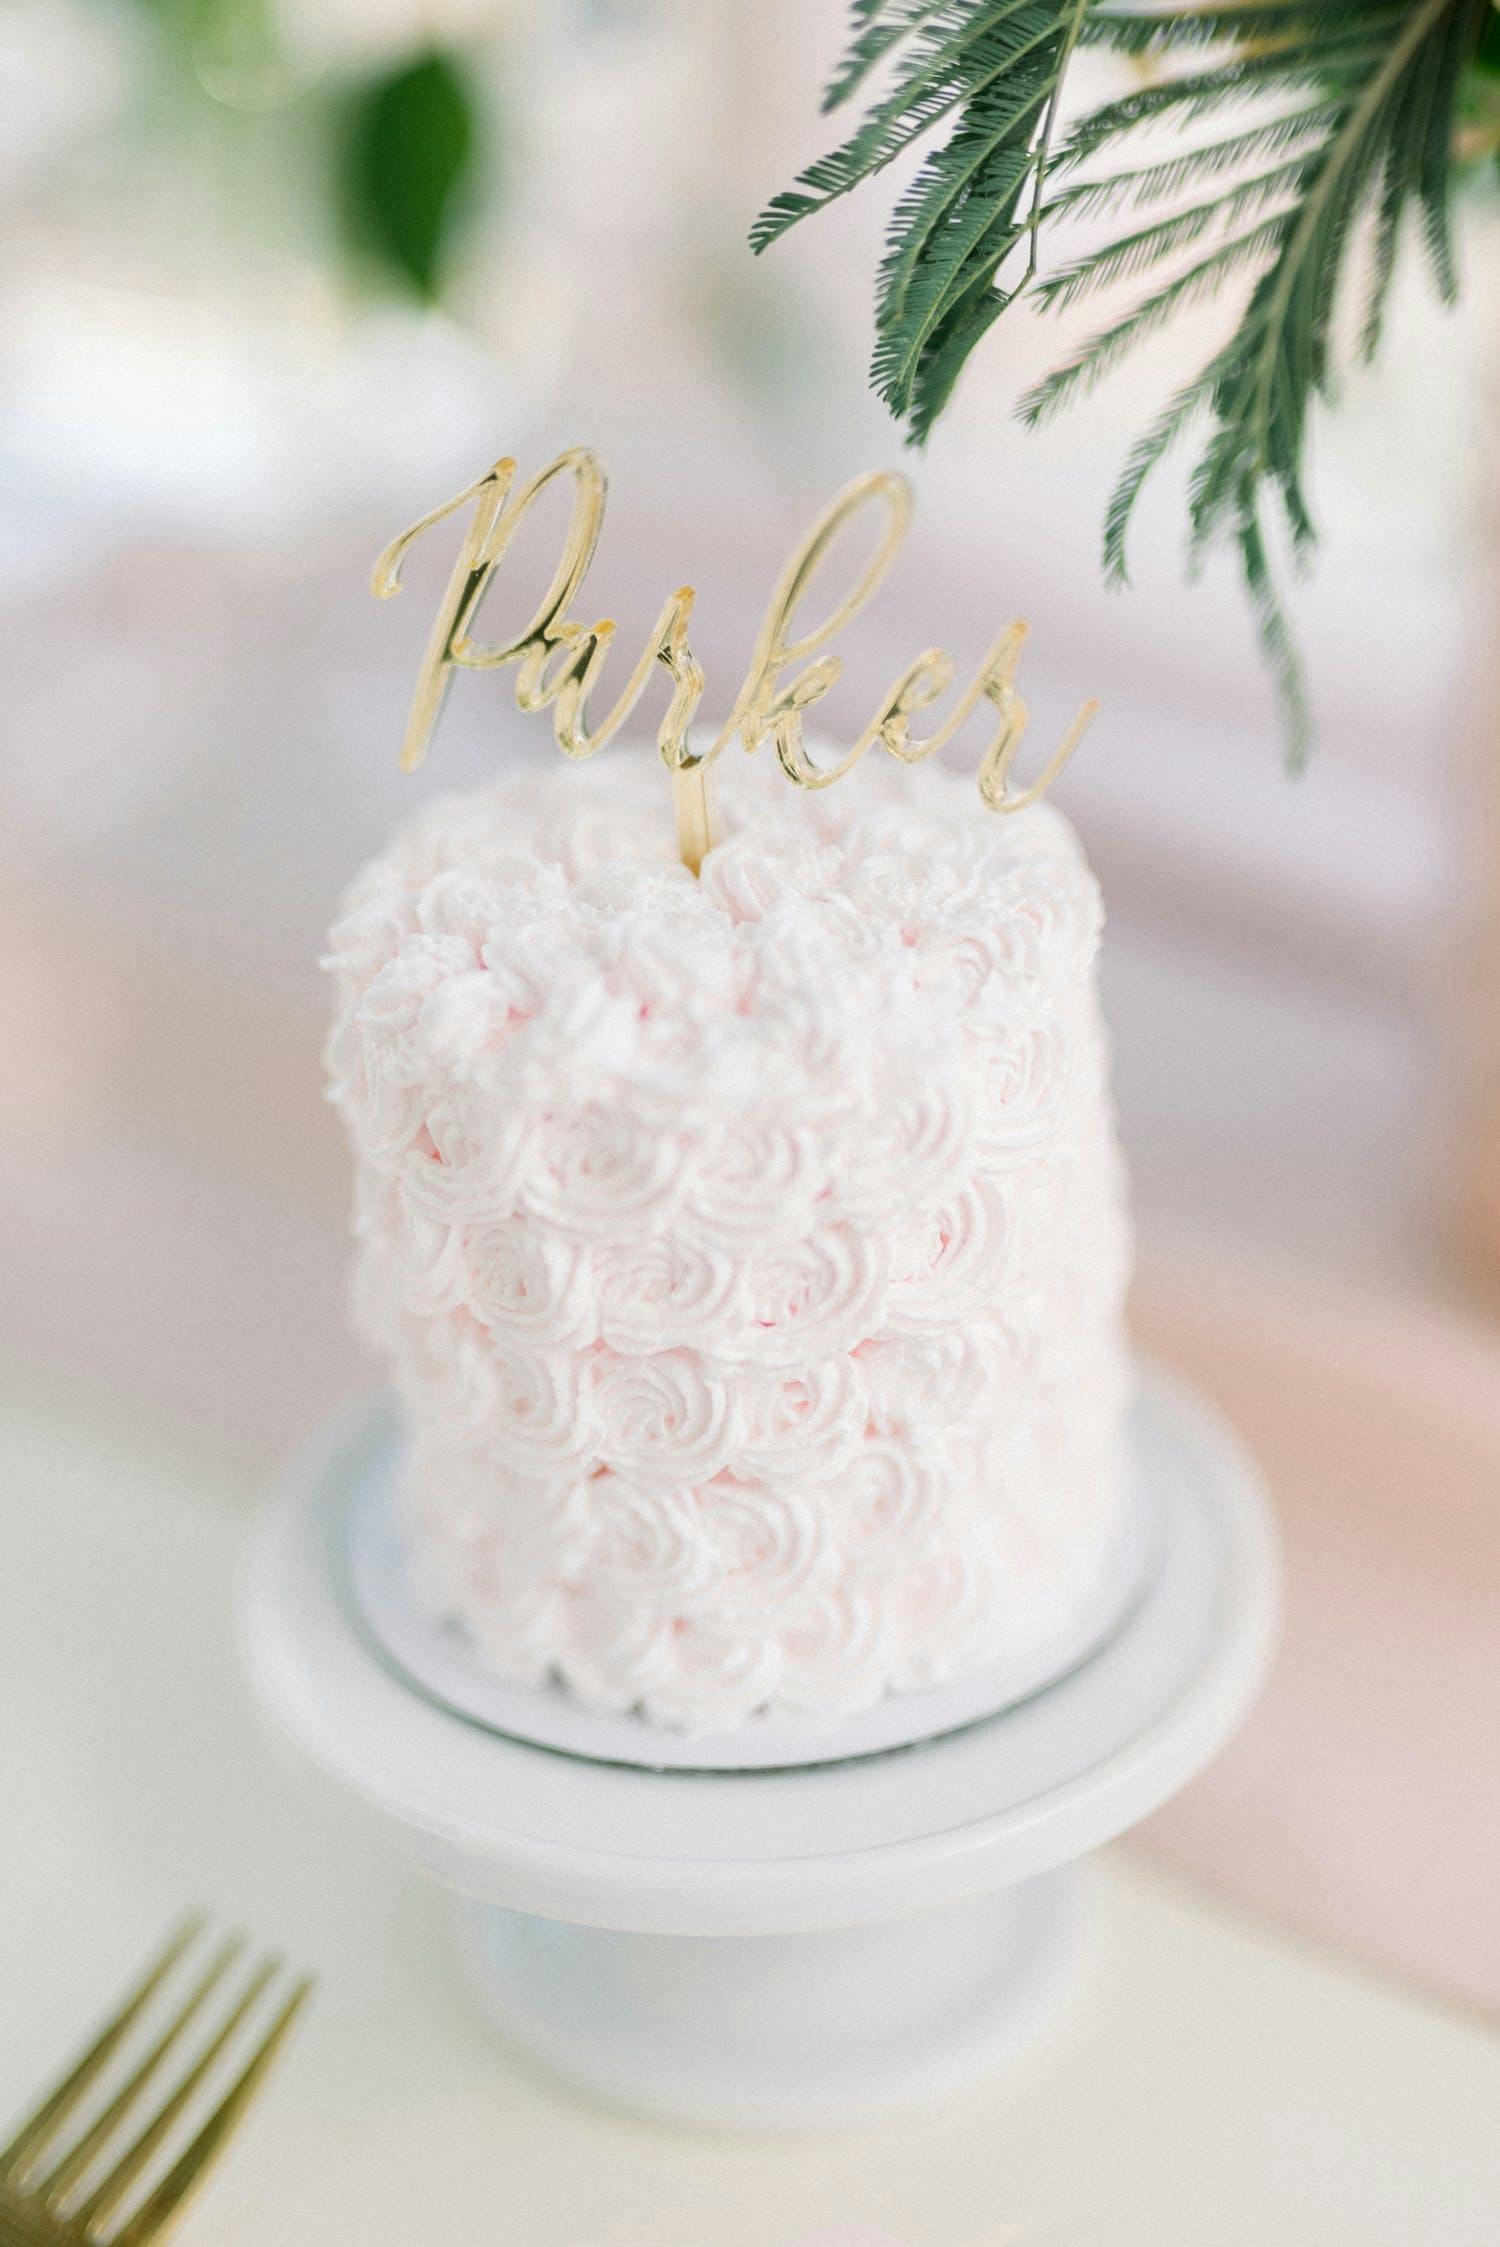 2021 placecard trend, mini cake with your guests name on it | PartySlate